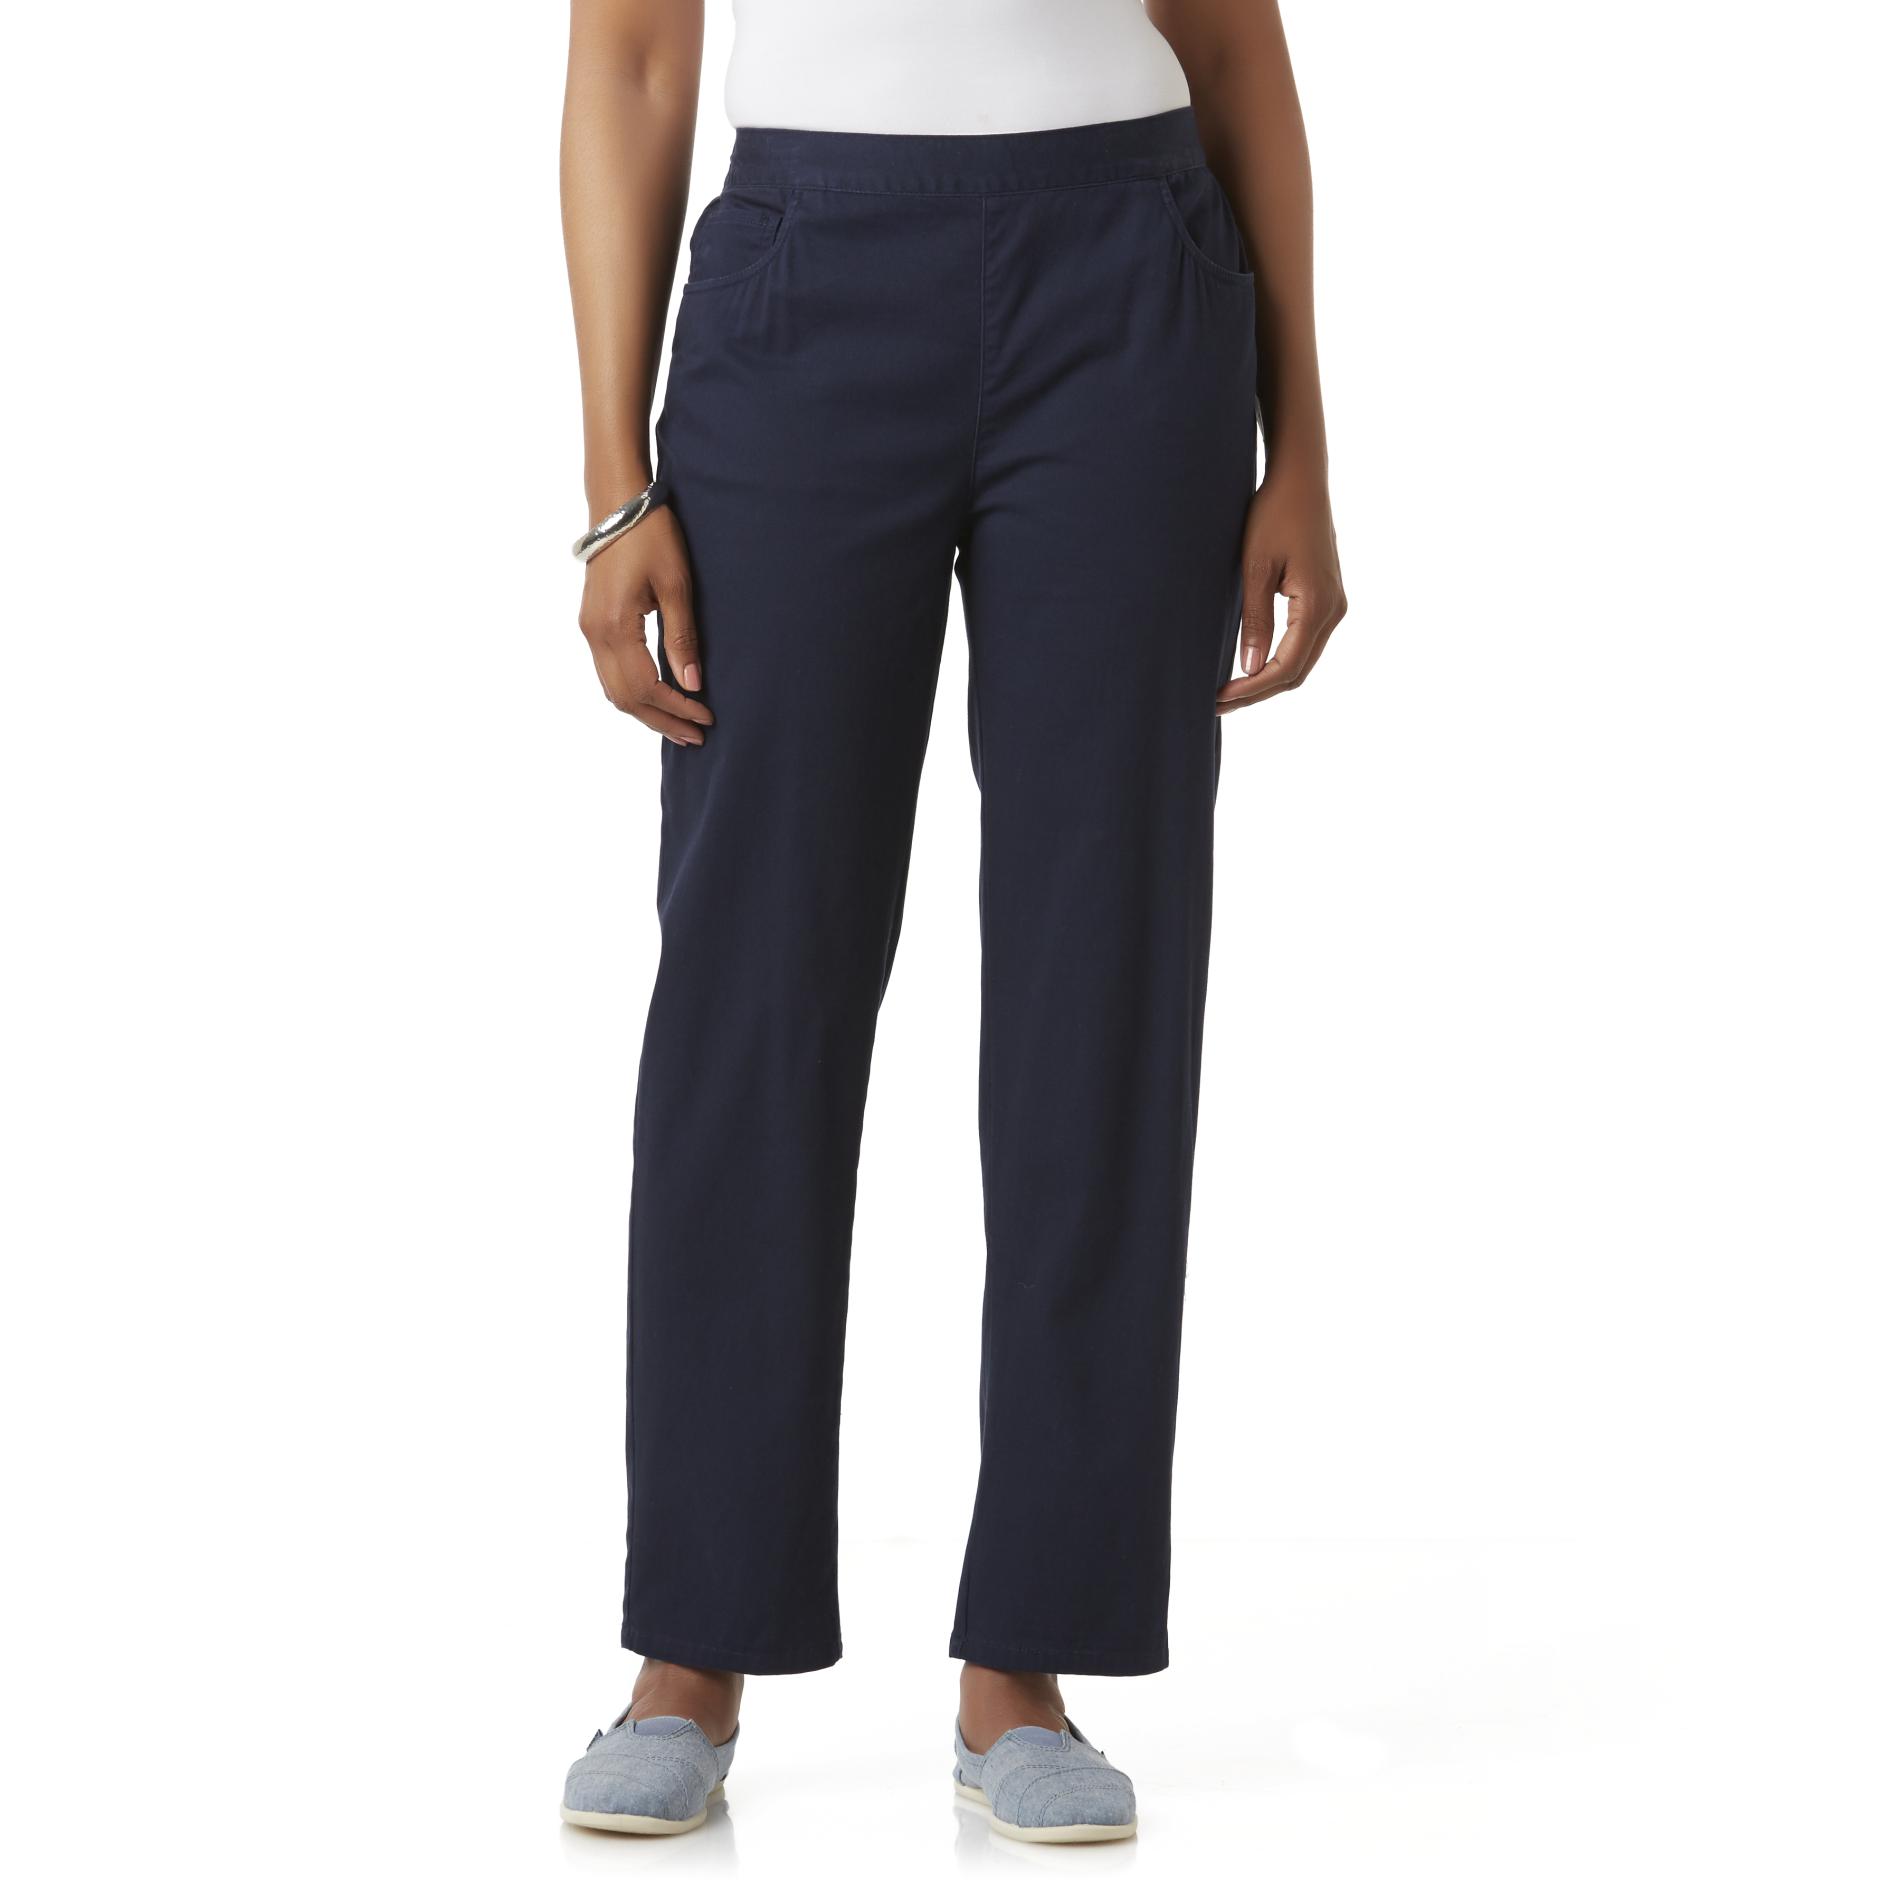 Basic Editions Women's Flat Front Twill Pants